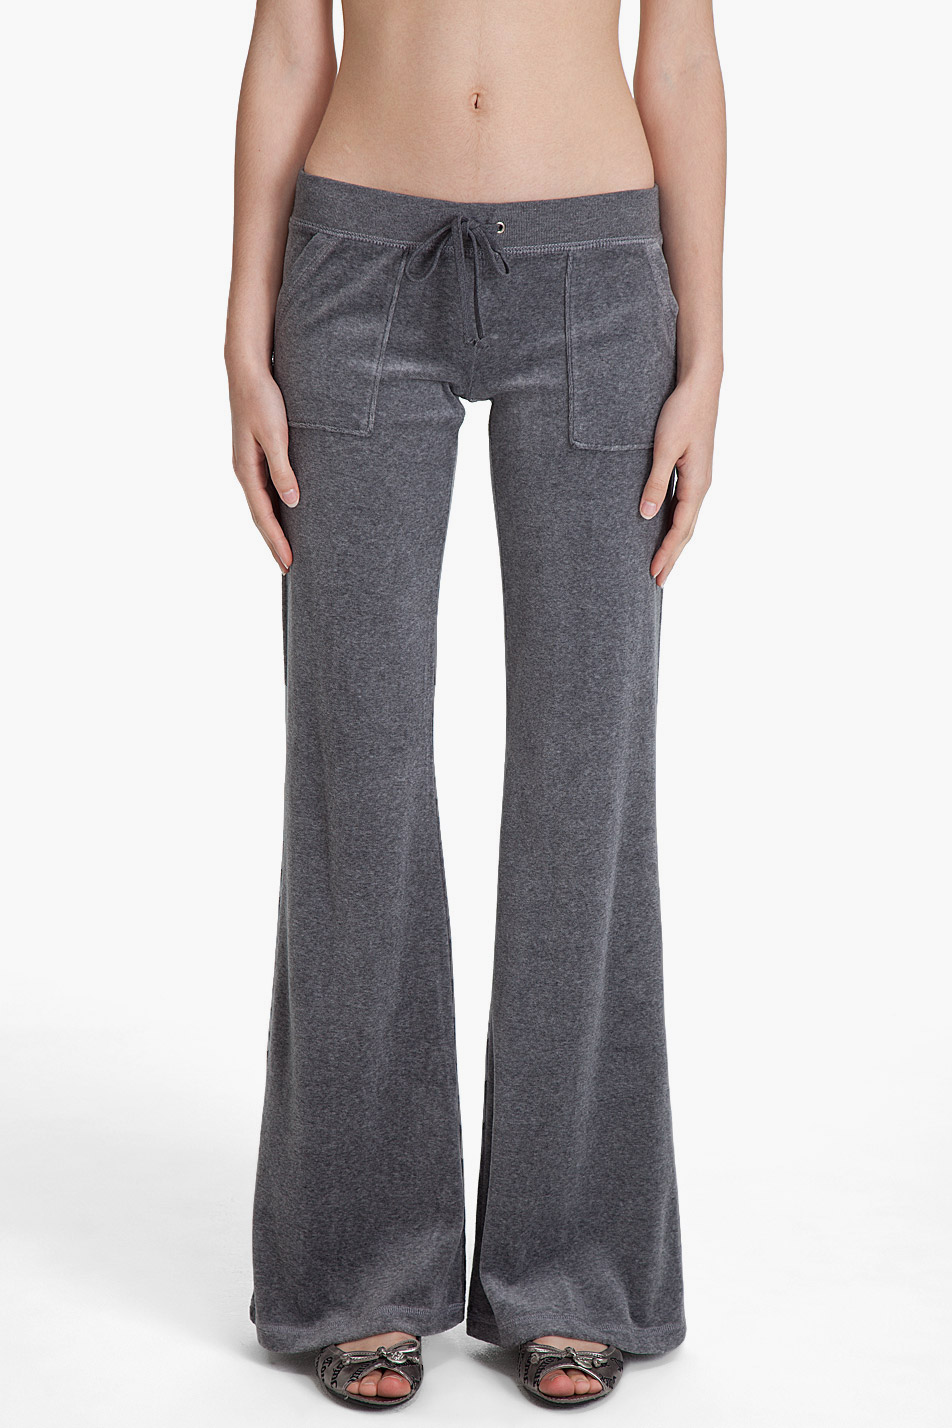 Juicy Couture Flare Velour Pants in Gray